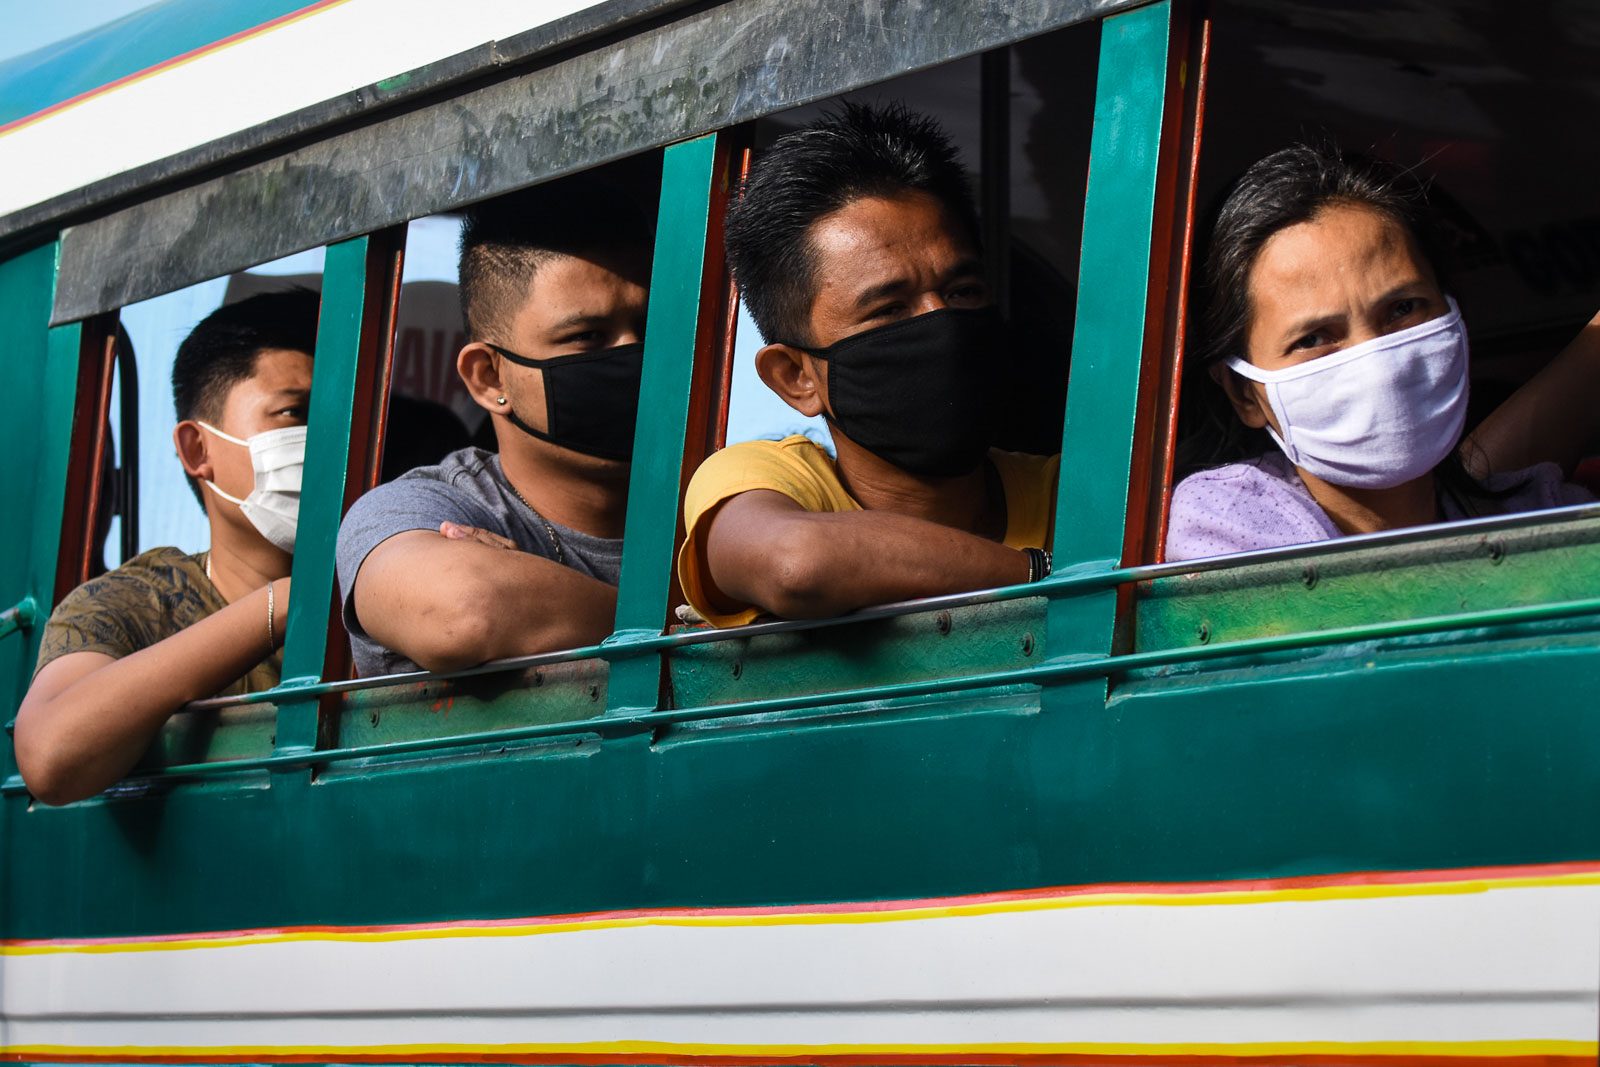 Congress tapping P200 billion GOCC funds to deal with pandemic